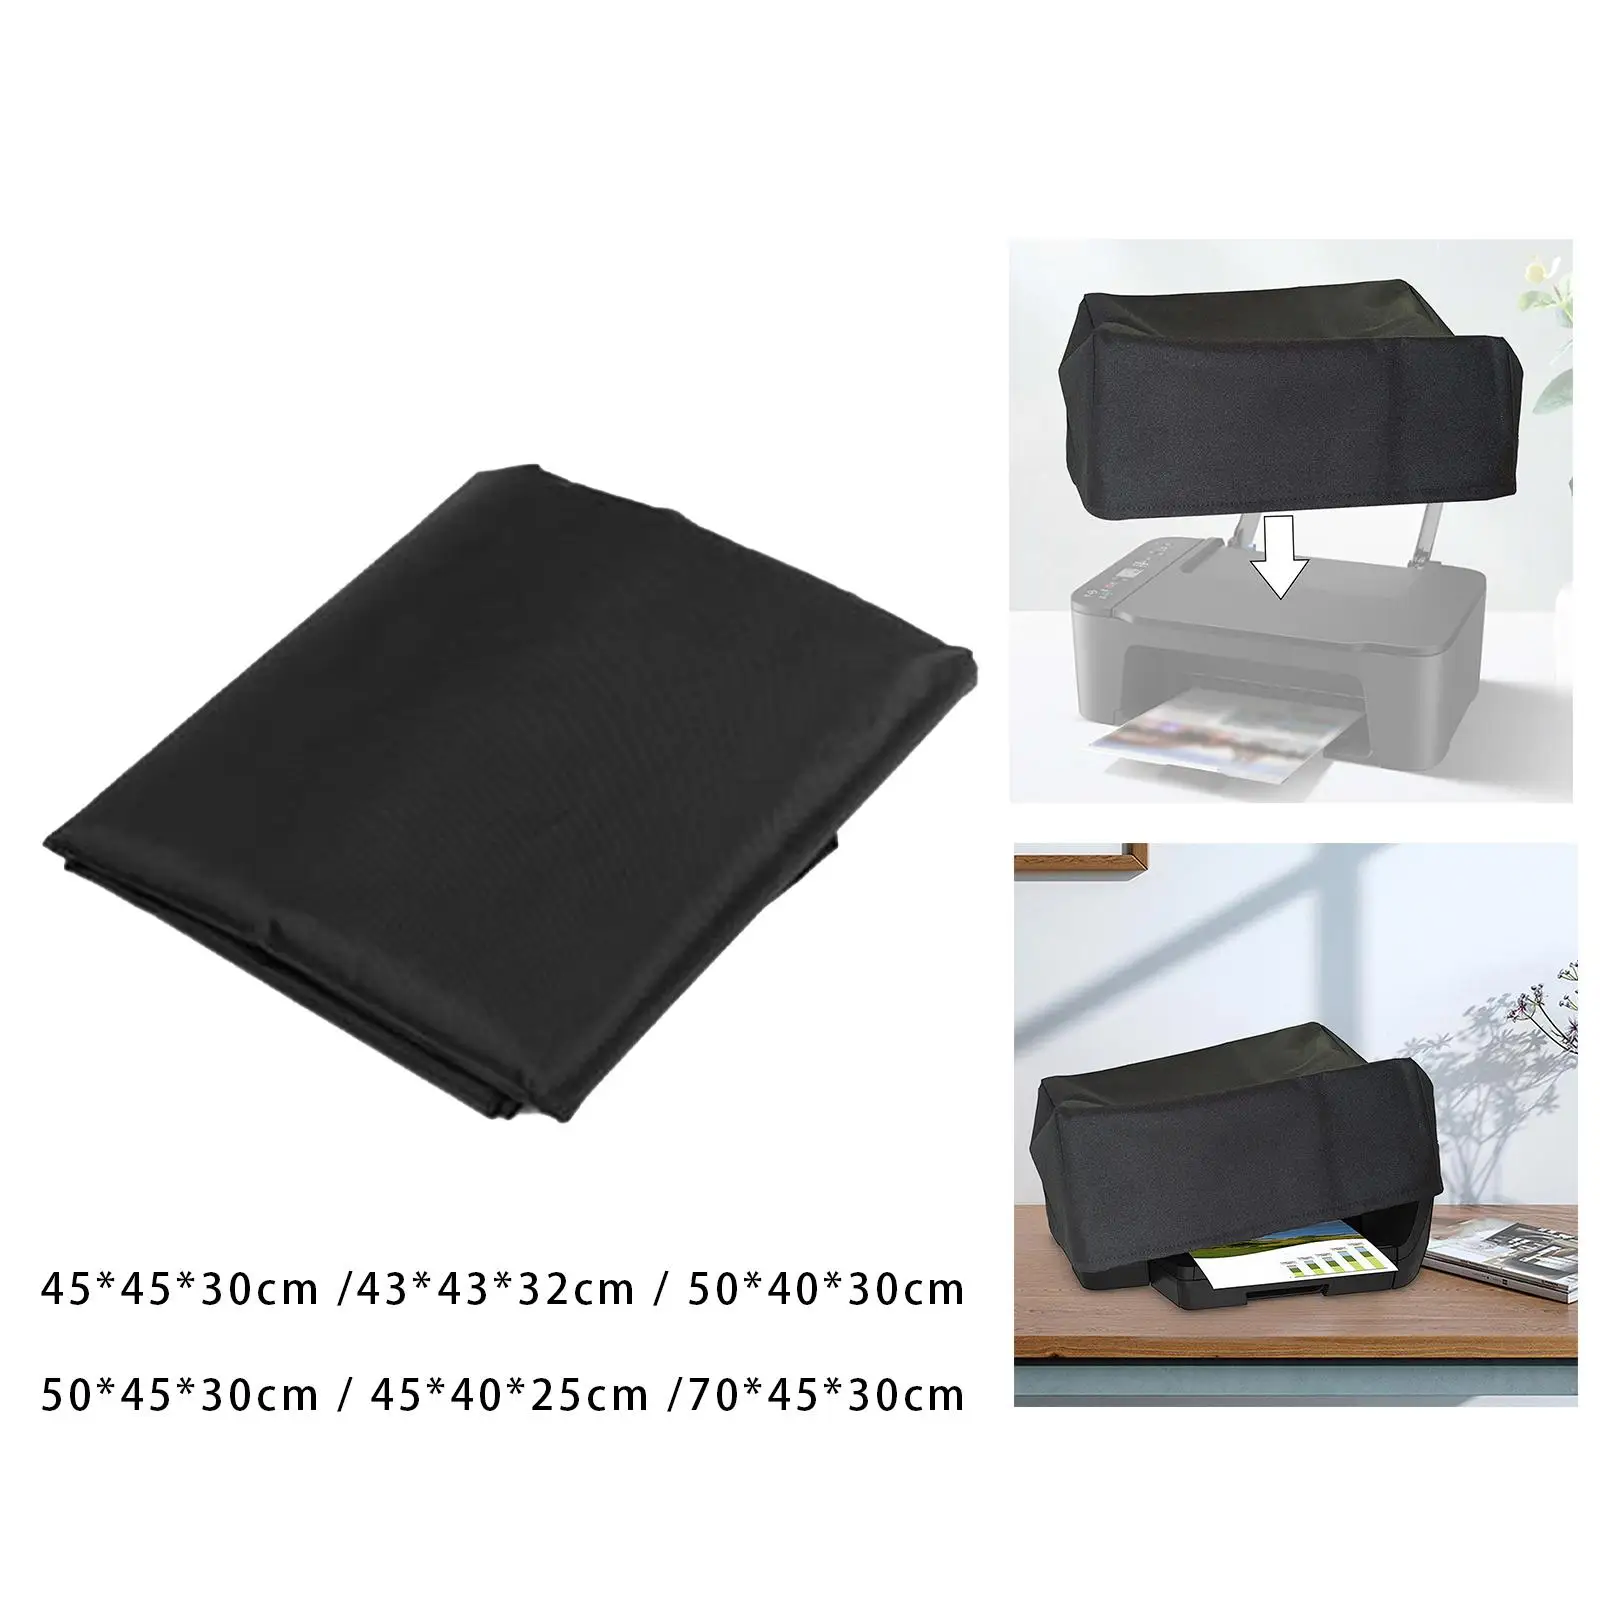 Printer Cover Waterproof Universal Durable Rainproof Foldable Copiers Protective Cover Reusable Printer Jacket Oxford for 9015